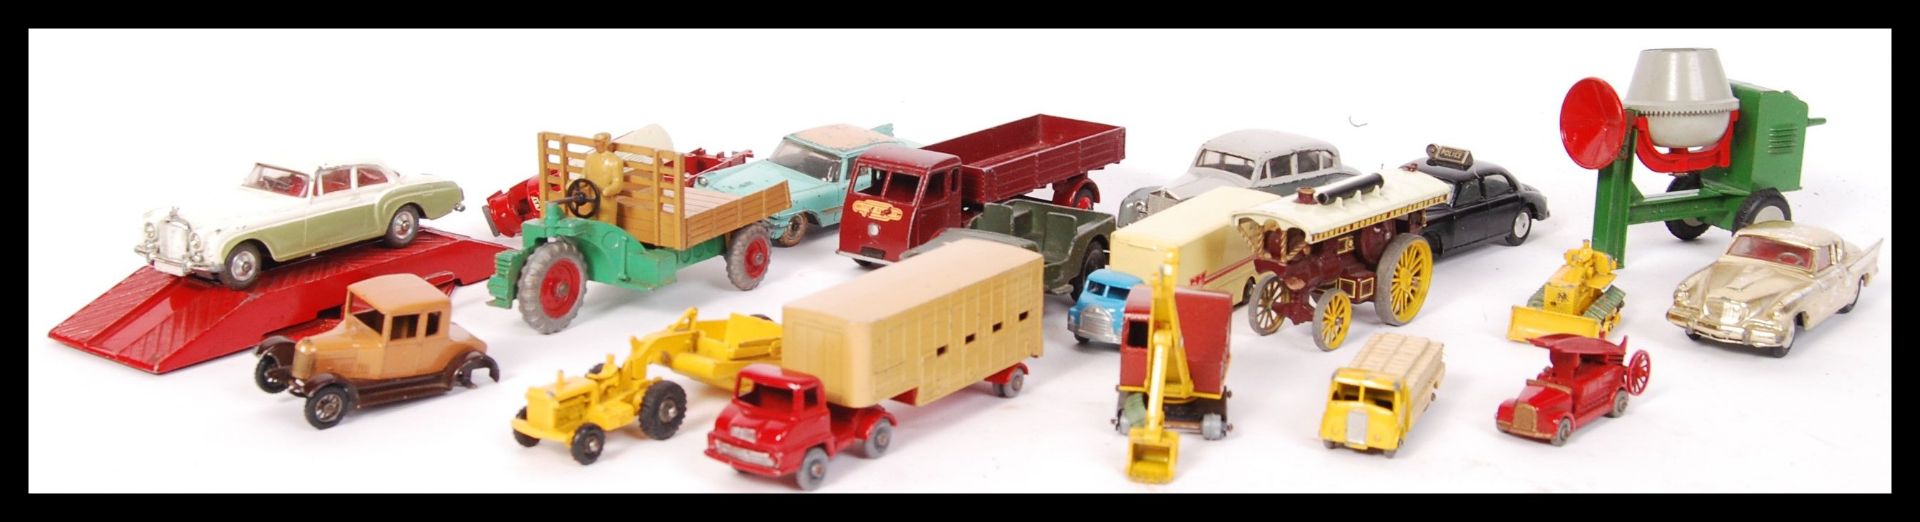 ASSORTED SCALE DIECAST MODEL MATCHBOX LESNEY, DINKY AND CORGI